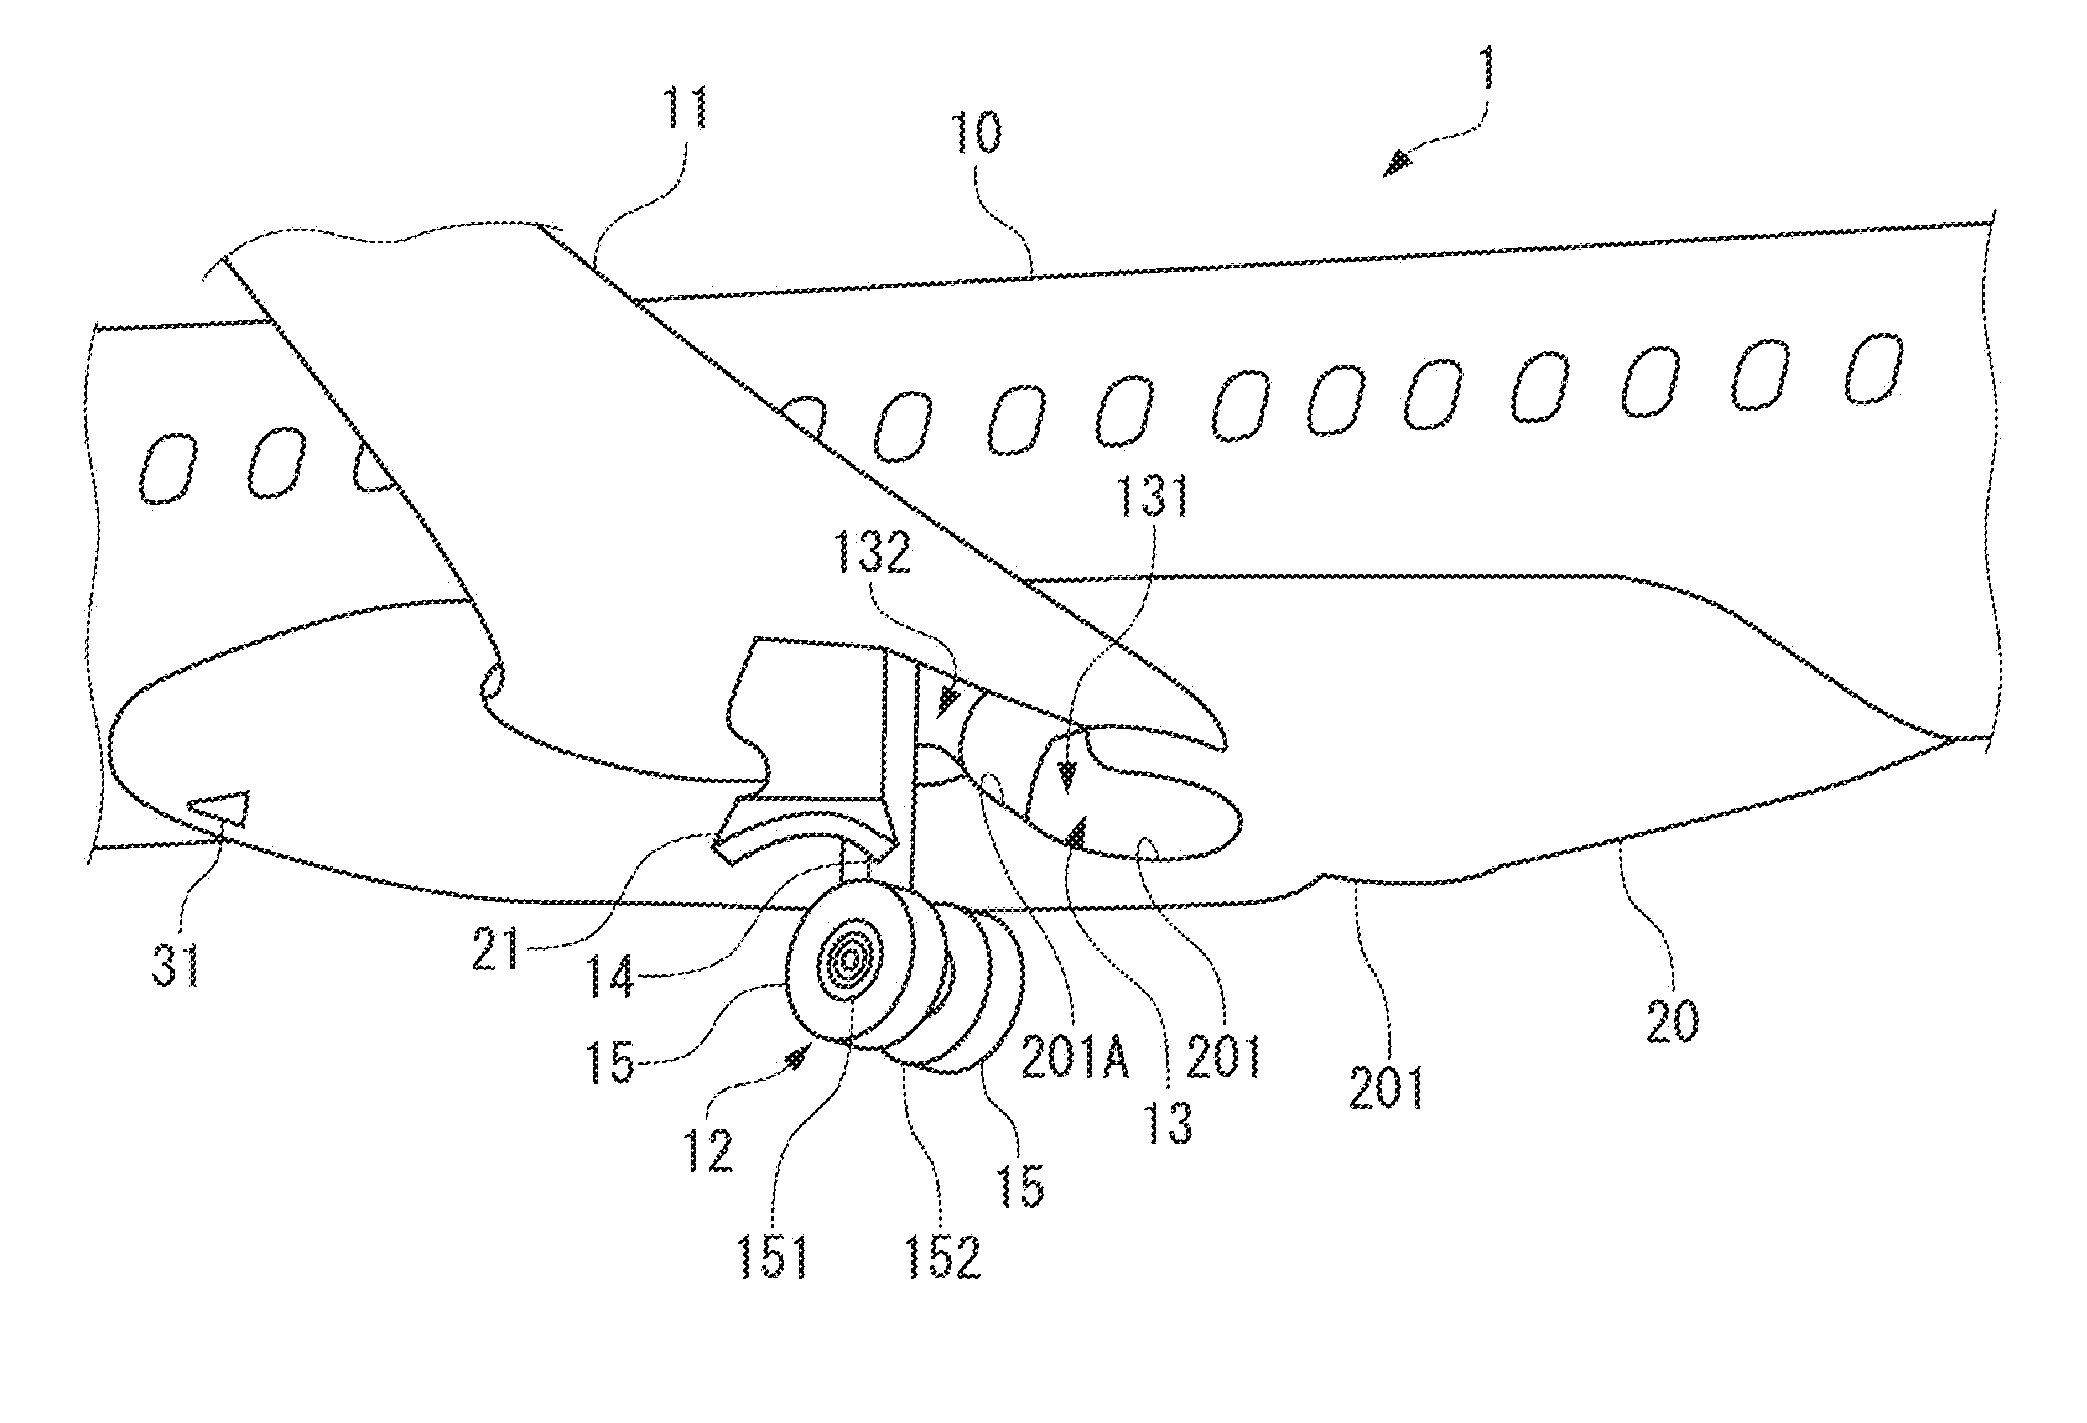 Heat removal structure of aircraft main landing gear bay